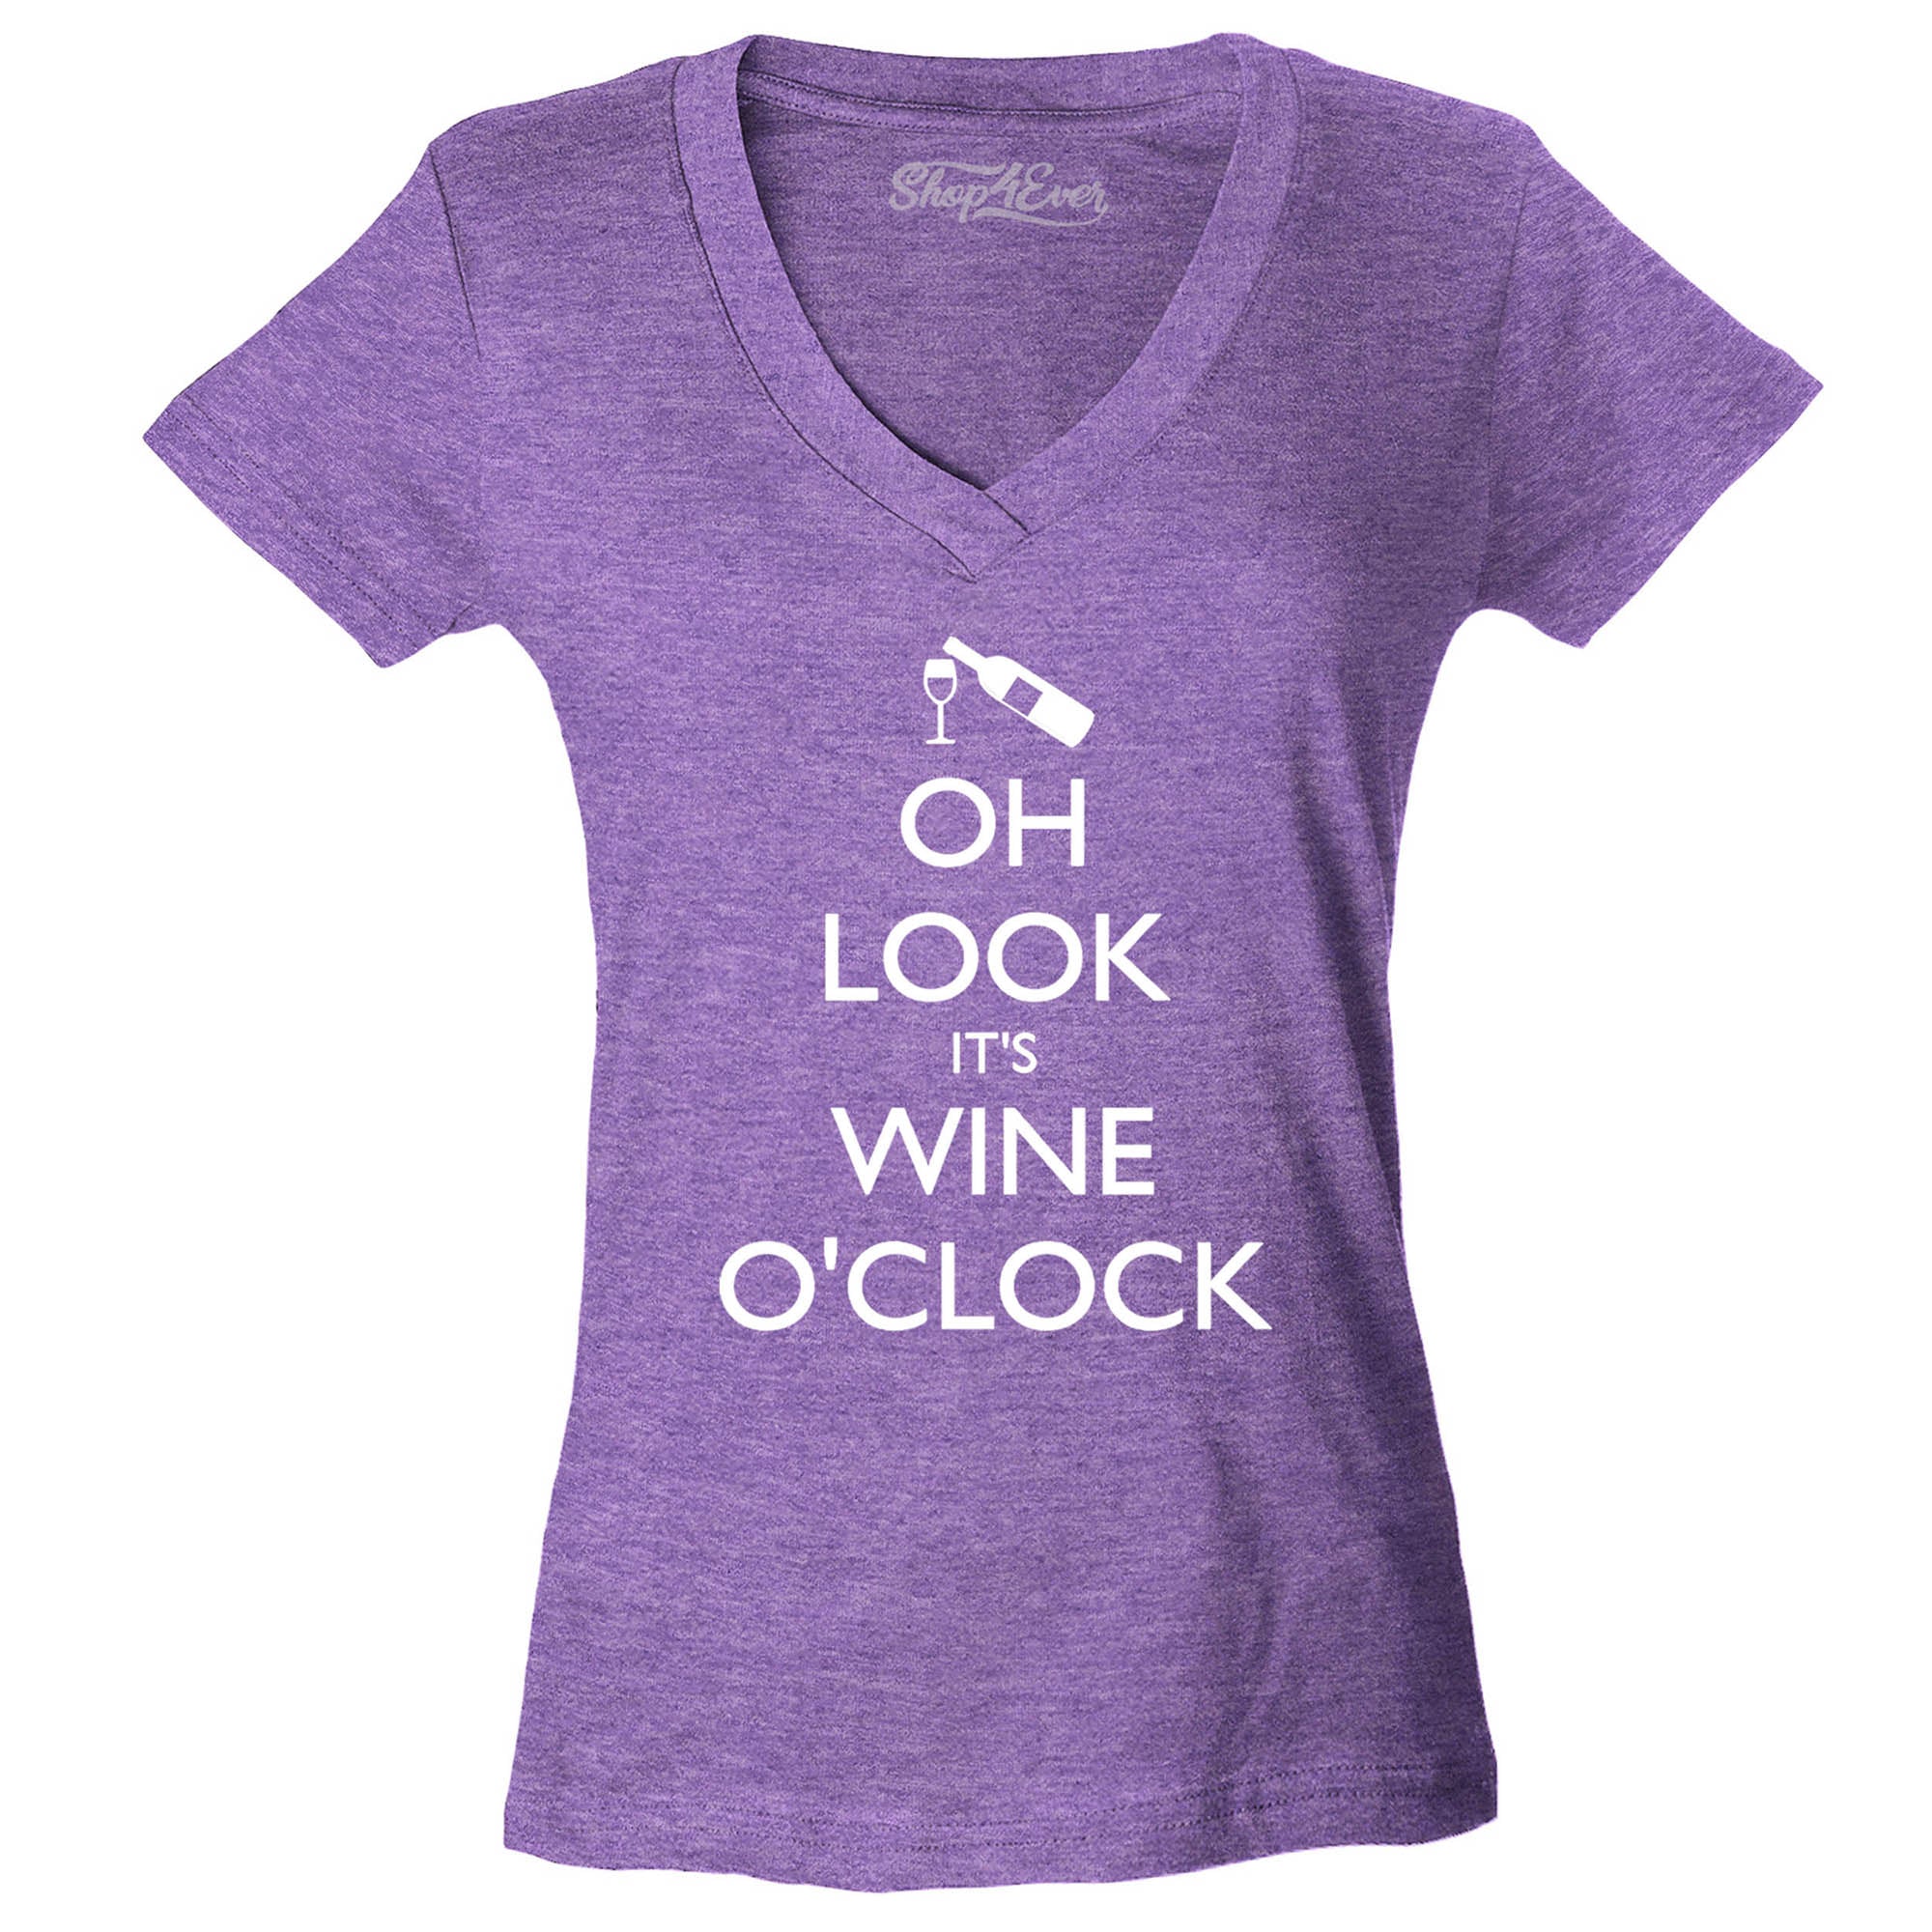 Oh Look It's Wine O'clock Women's V-Neck Drinking Shirts Slim FIT